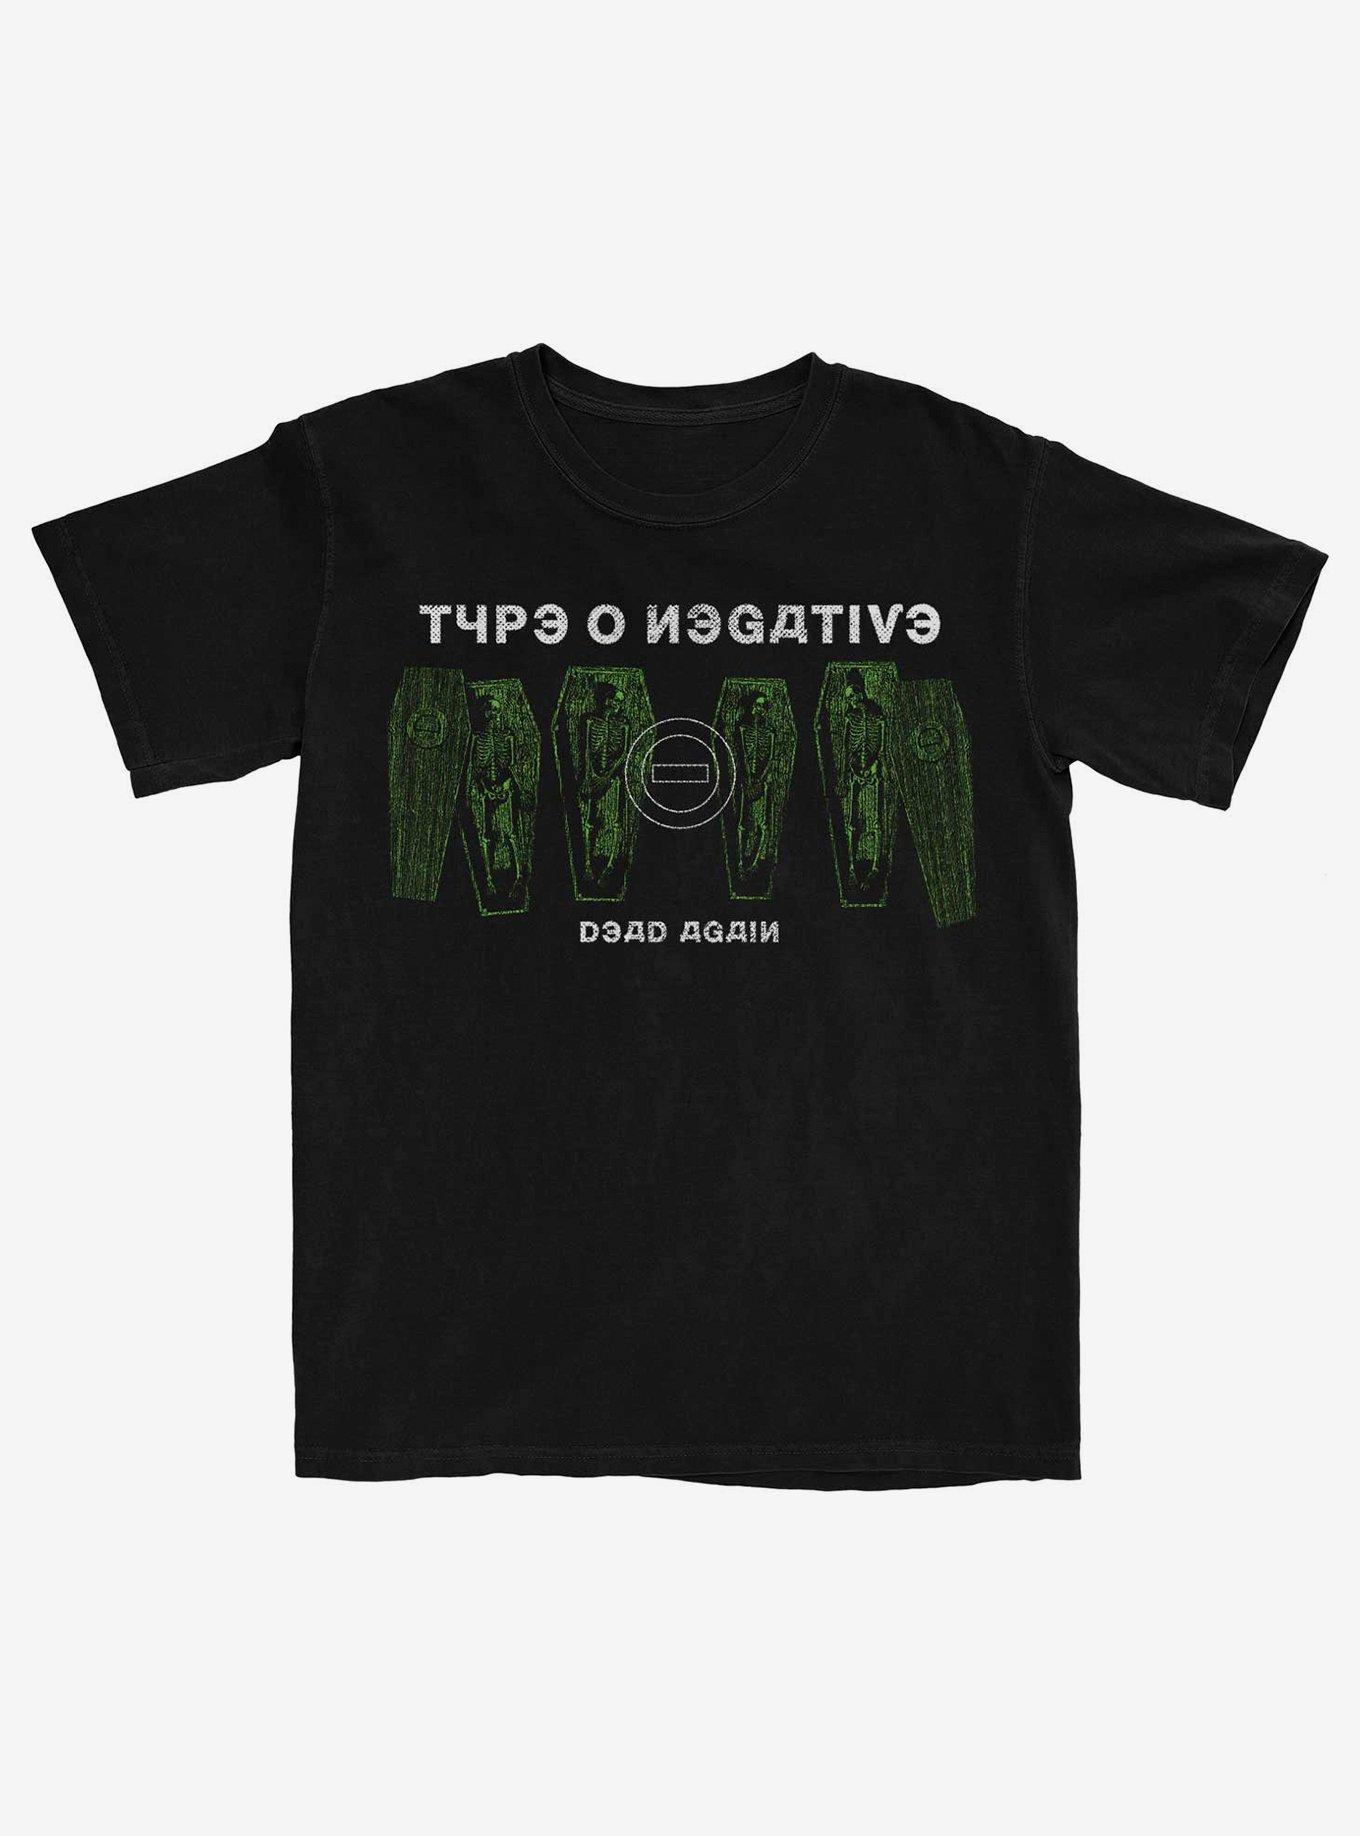 Type O Negative T Shirt Be A Man Band Logo New Official Mens Black :  : Clothing, Shoes & Accessories